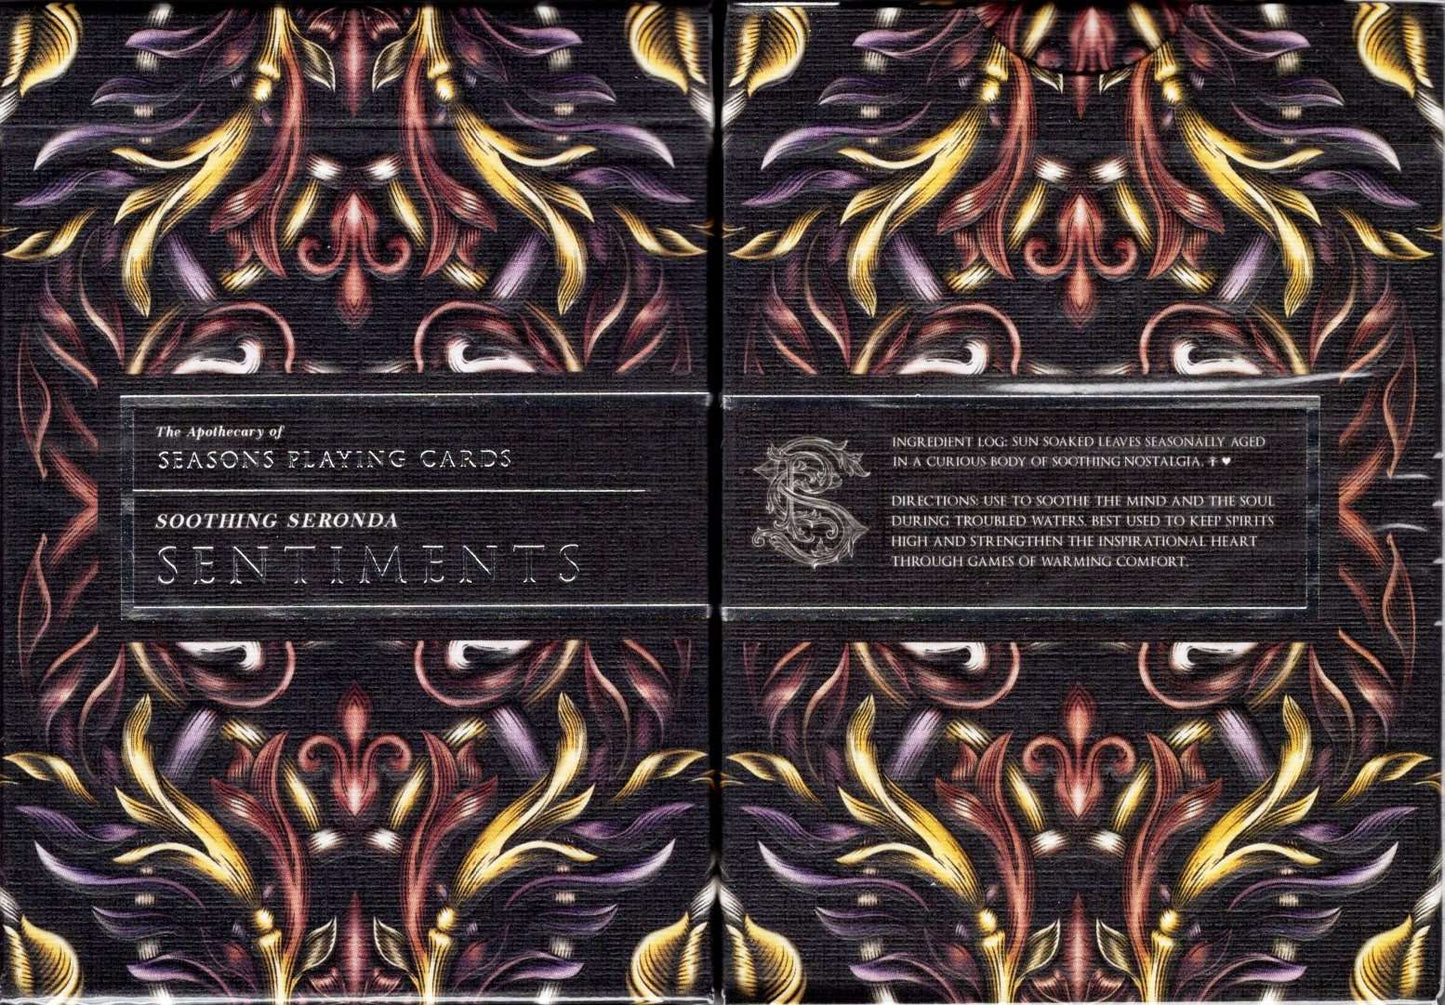 PlayingCardDecks.com-Apothecary v2 Playing Cards USPCC - Sentiments & Virtues: Sentiments